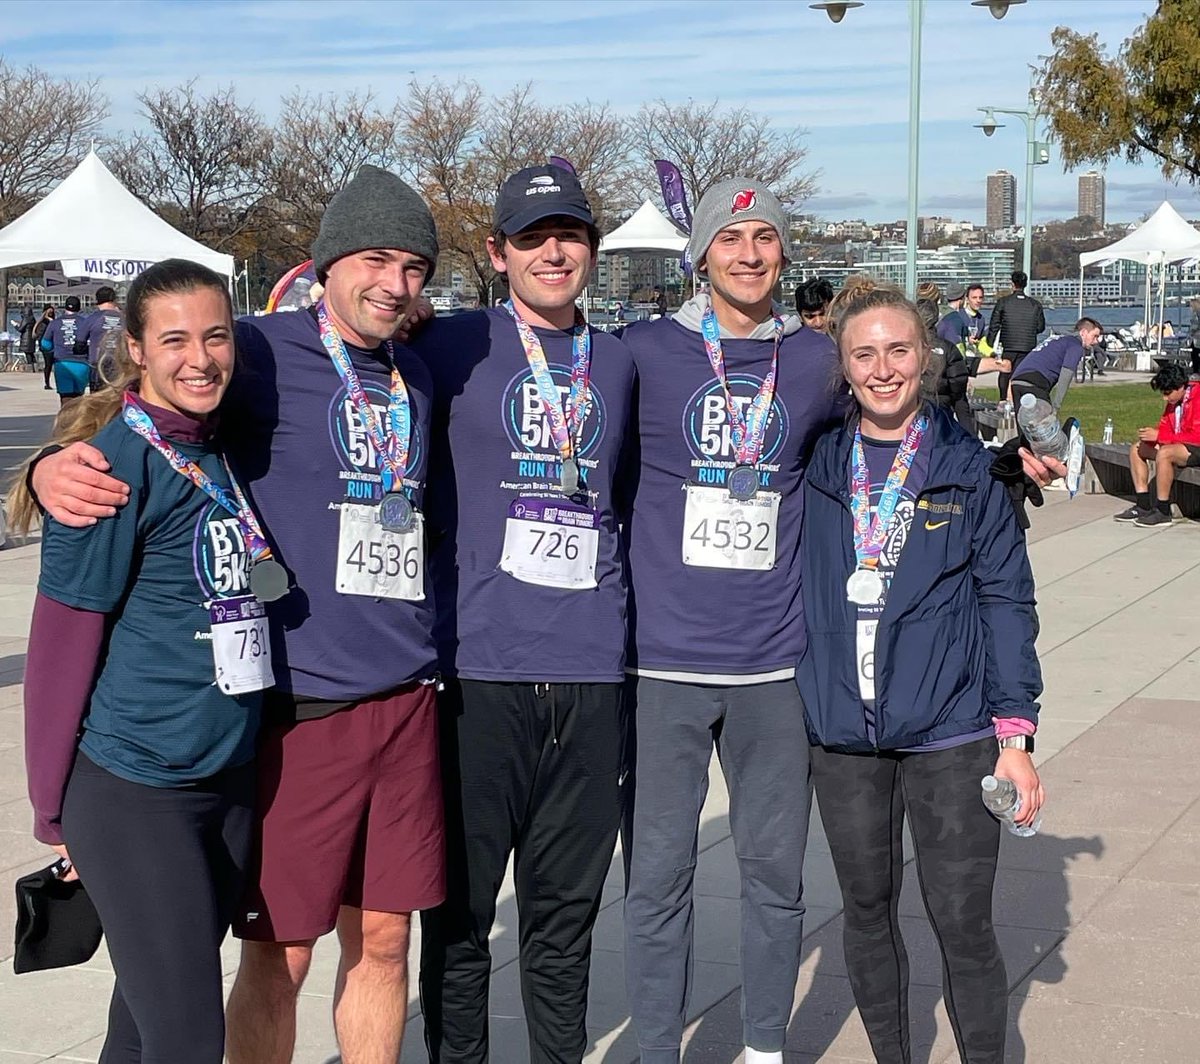 Thank you to the patients, survivors, families, and teams who made the 2023 @theABTA New York BT5K a success, exceeding its $230,000 goal to support research and patient support @KellyDSitkin @nyulangone @ColumbiaNeuro @LenoxNeurosurg